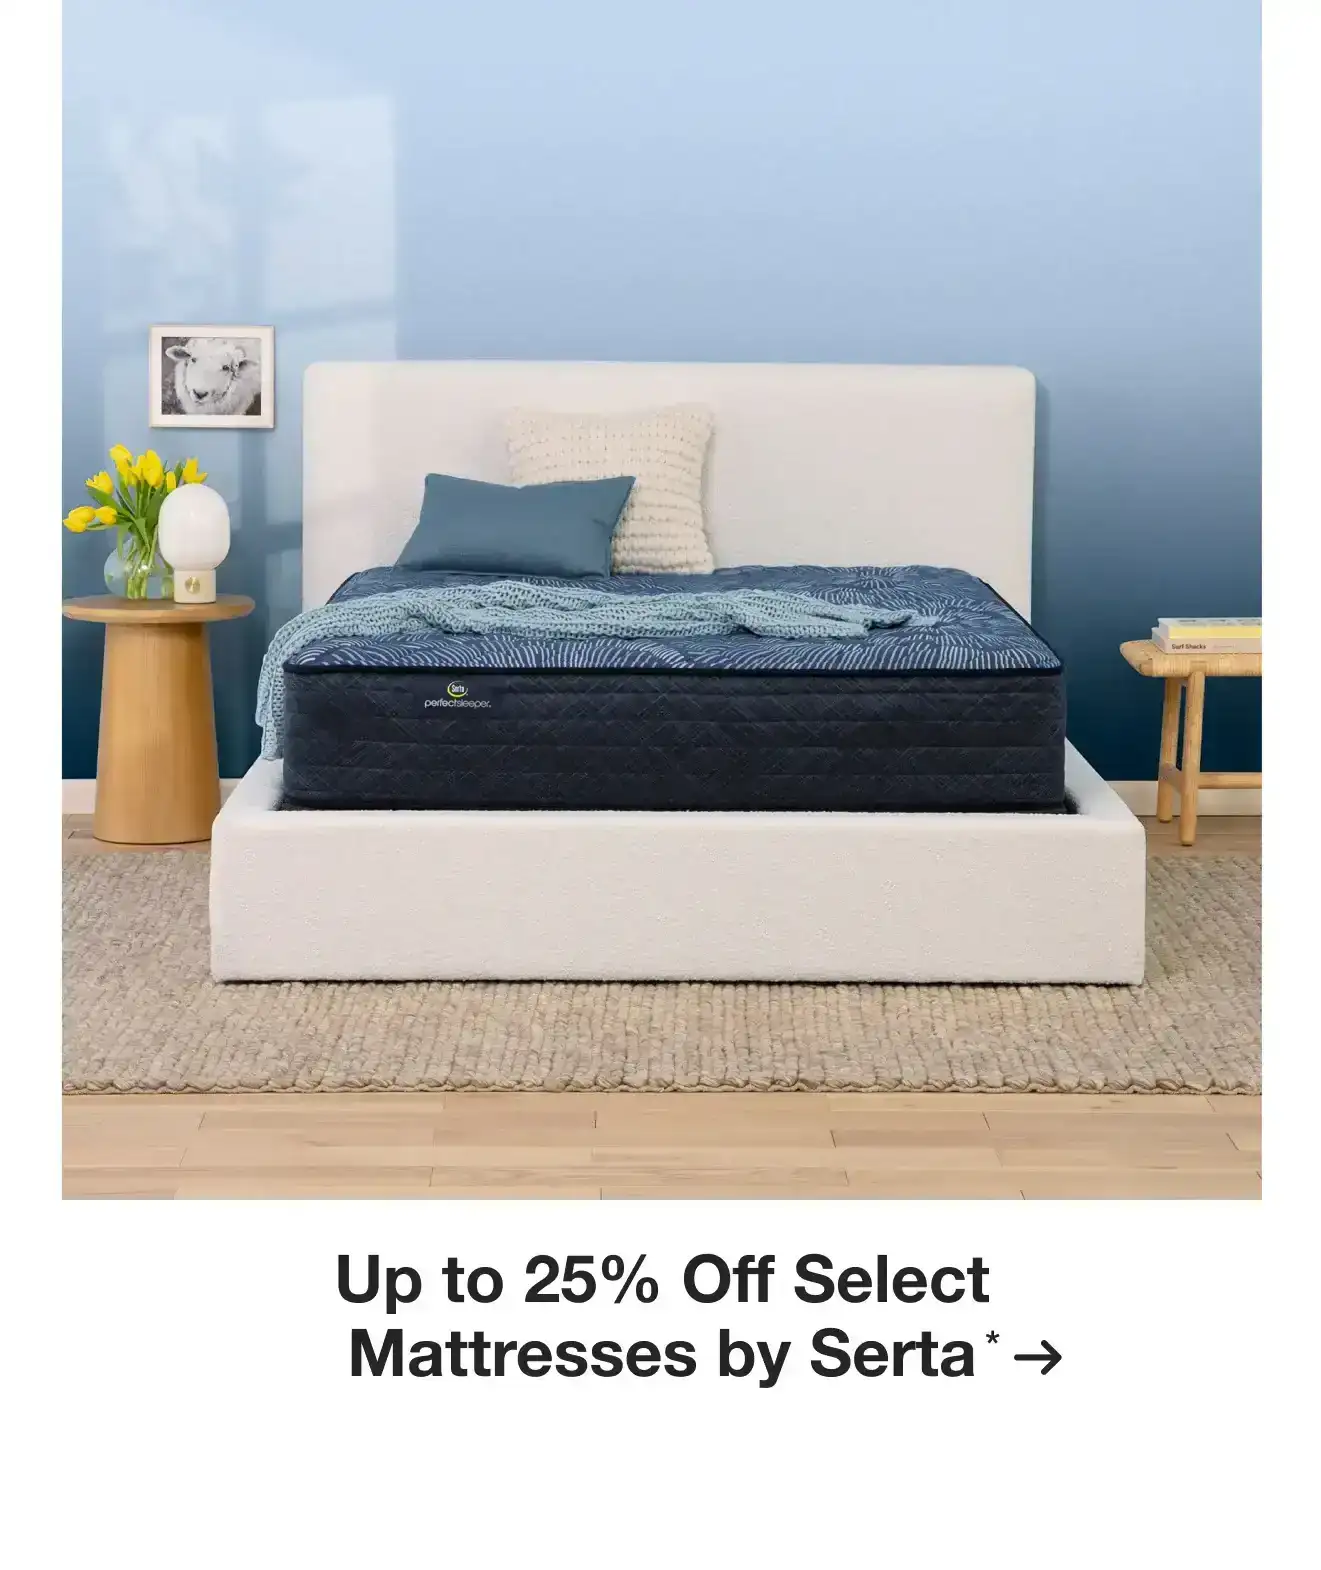 Up to 25% Off Select Mattresses by Serta*